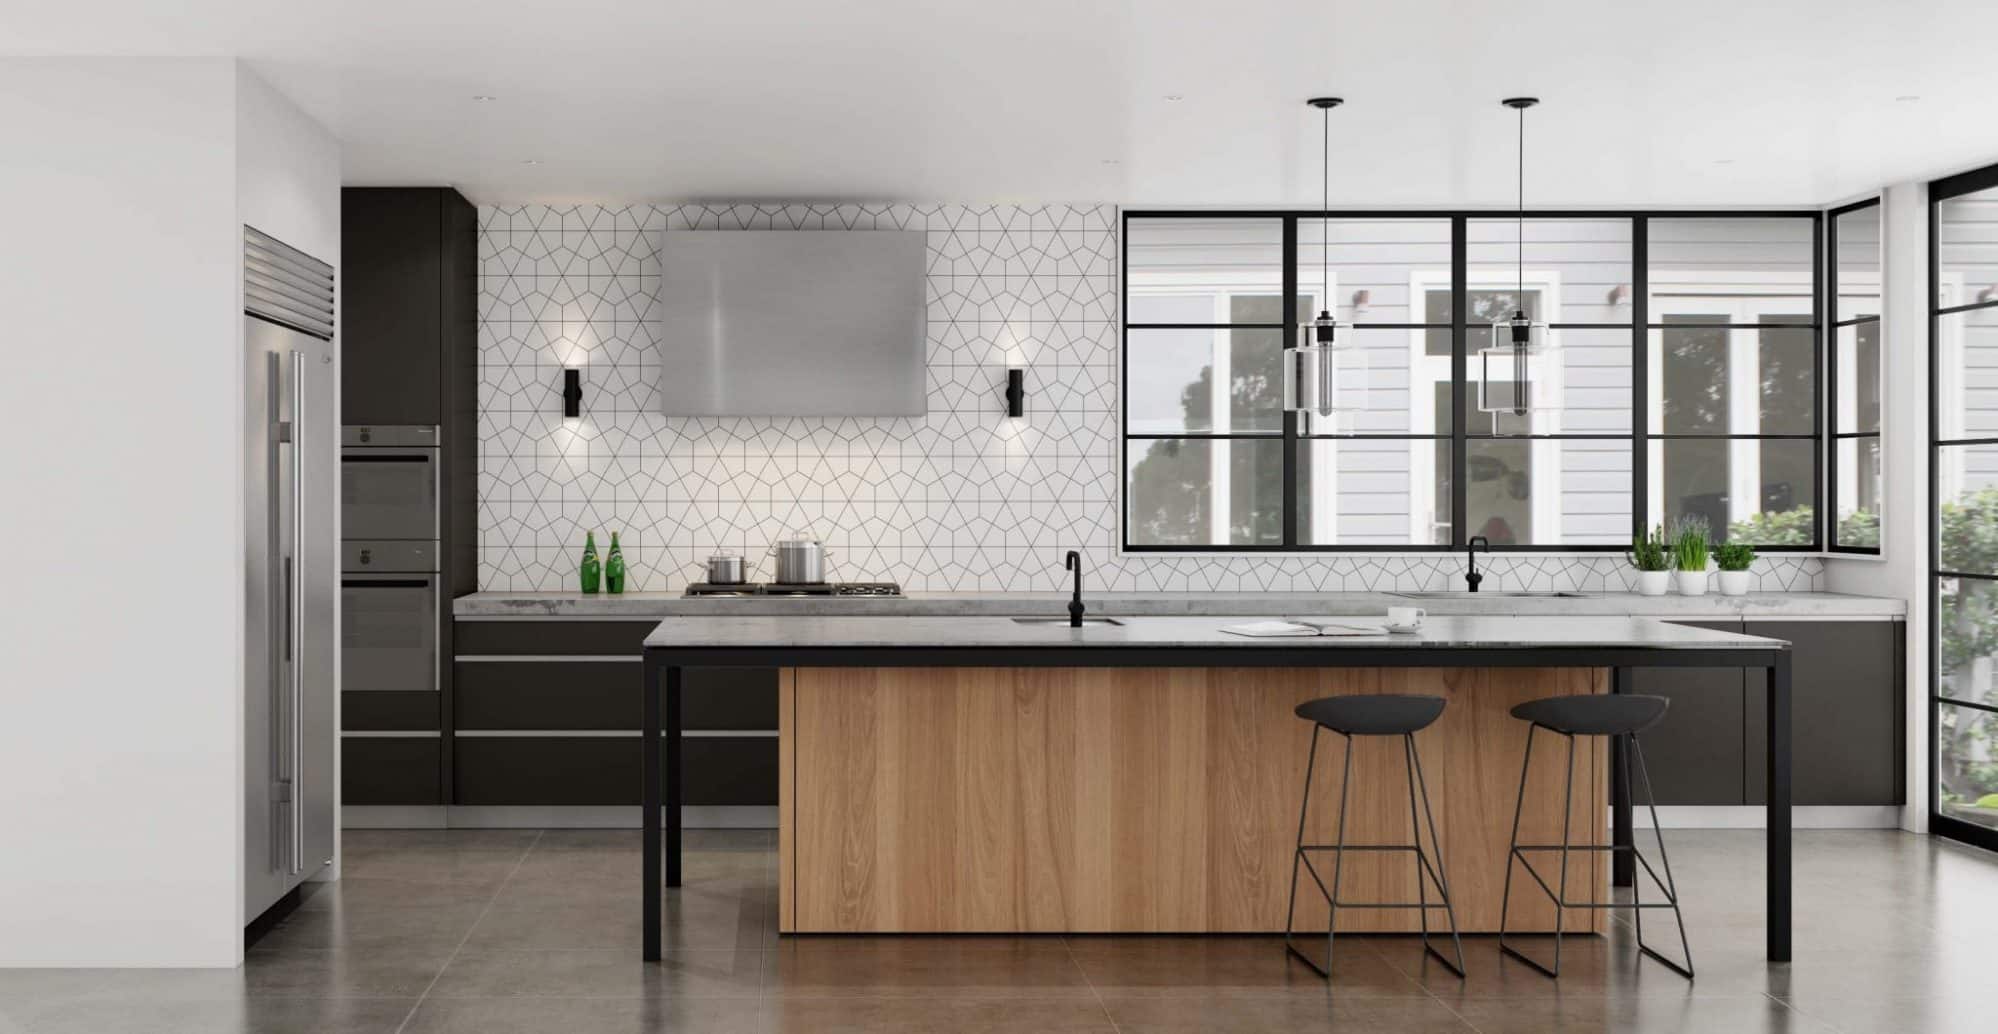 Why Should You Consider Hiring Professional Kitchen Designers?